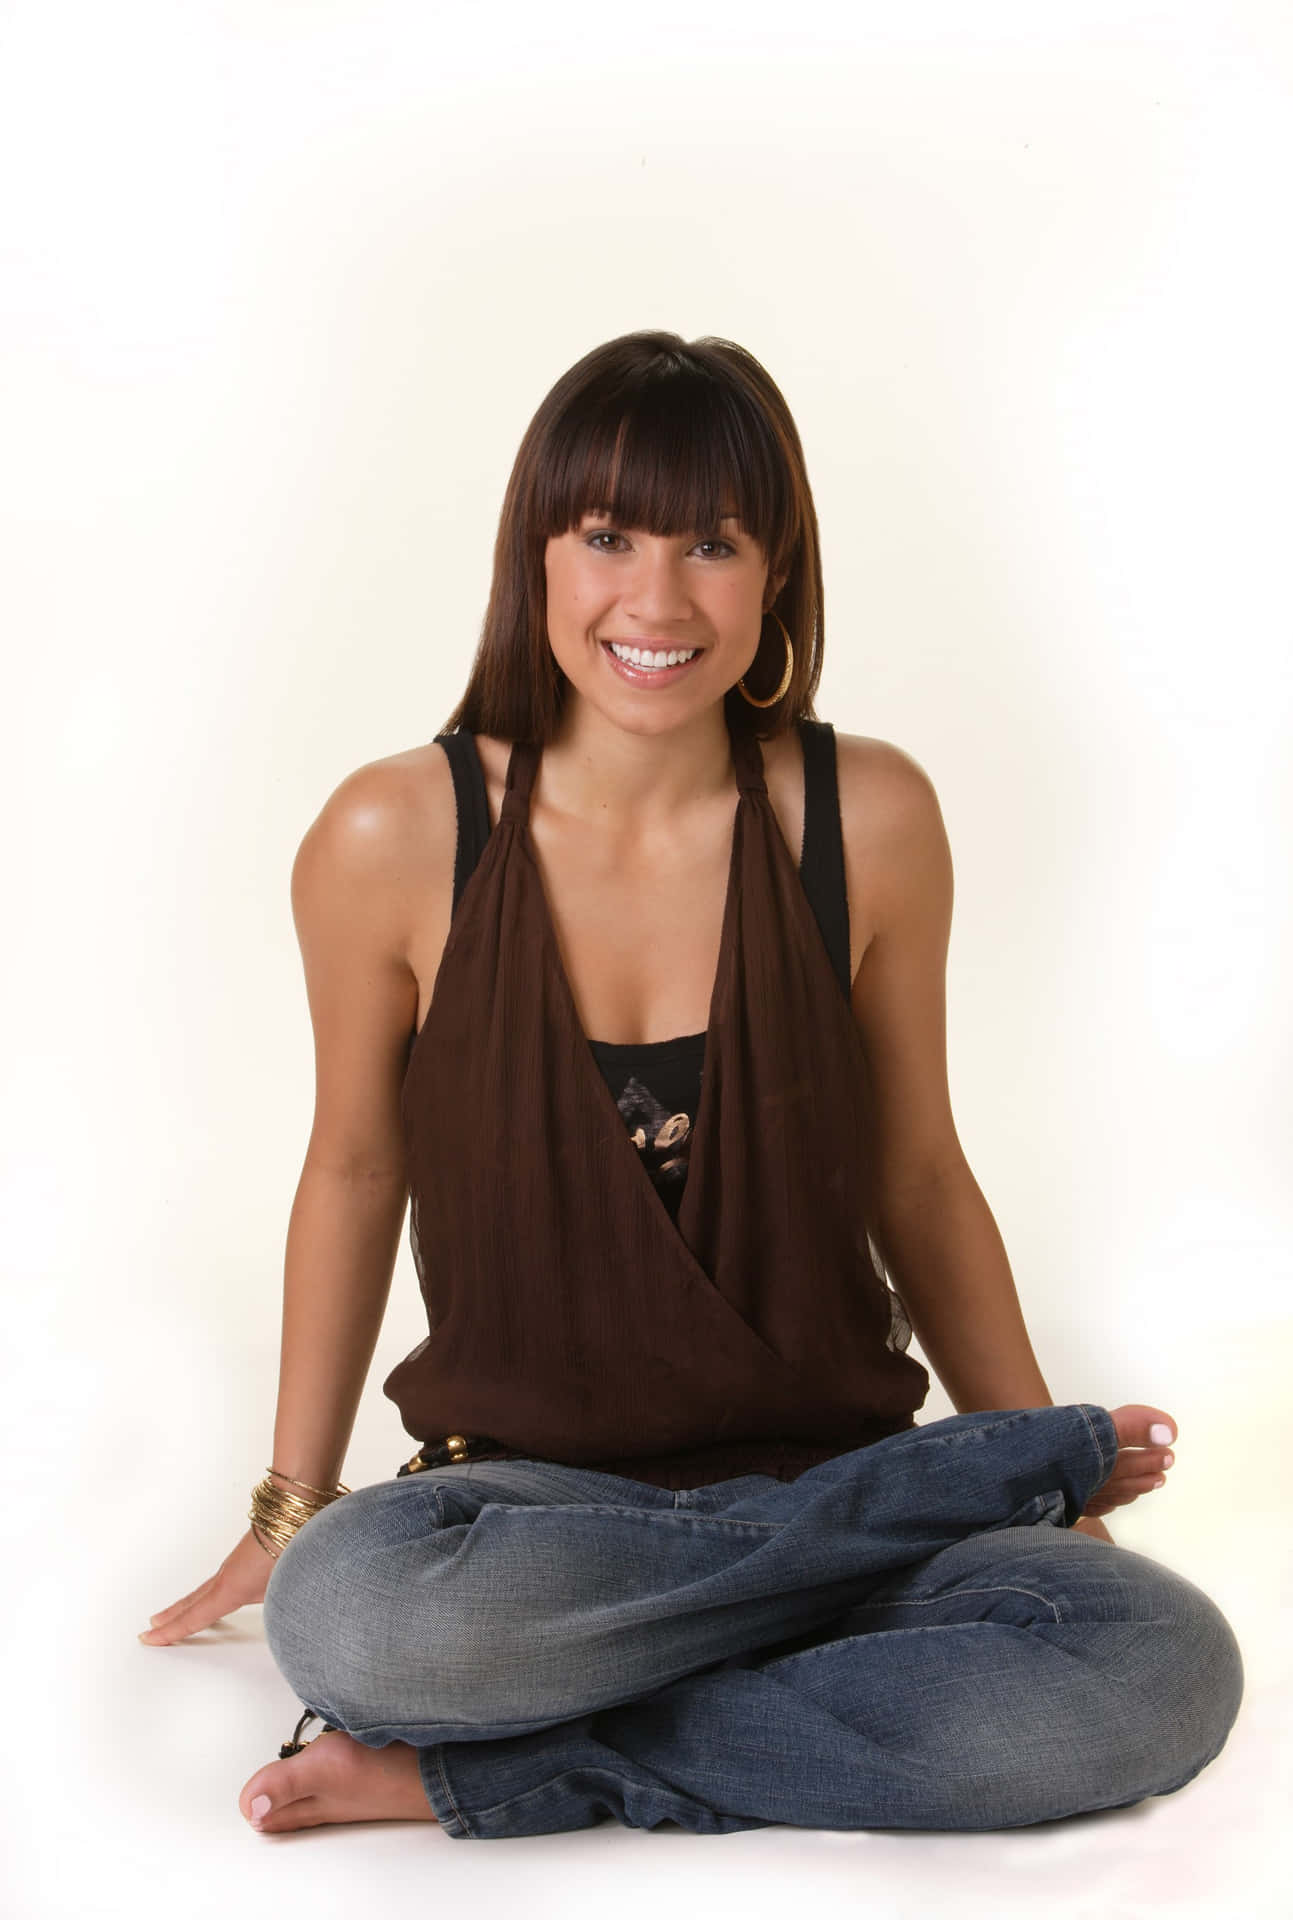 Cassie Steele Smiling Casually Sitting Wallpaper